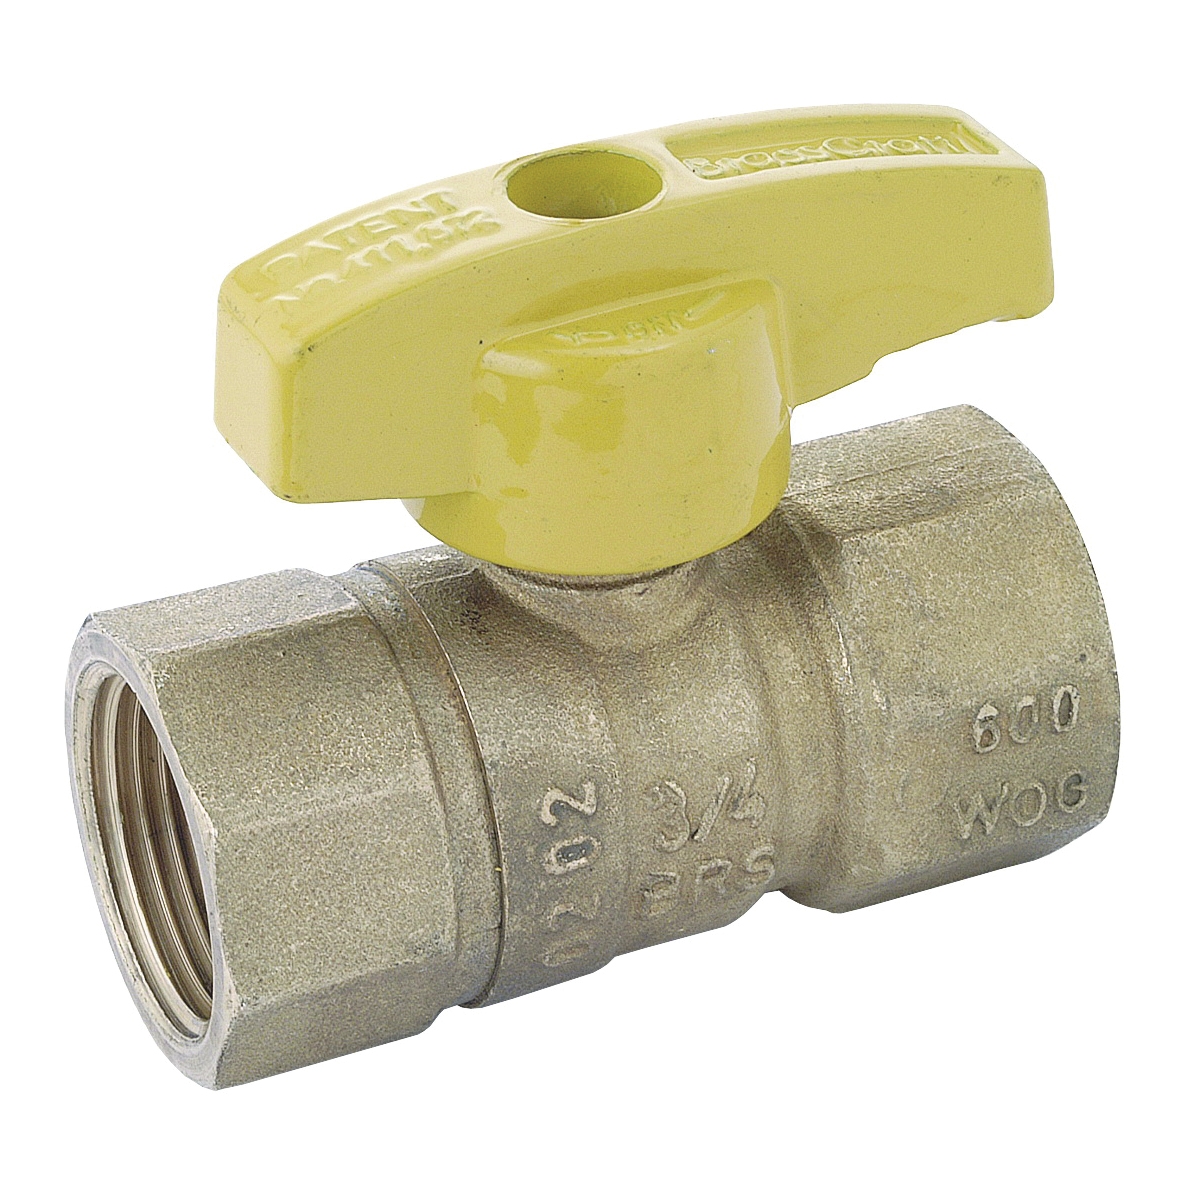 PSBV503-12 Gas Ball Valve, 3/4 in Connection, Flared, 5 psi Pressure, Brass Body